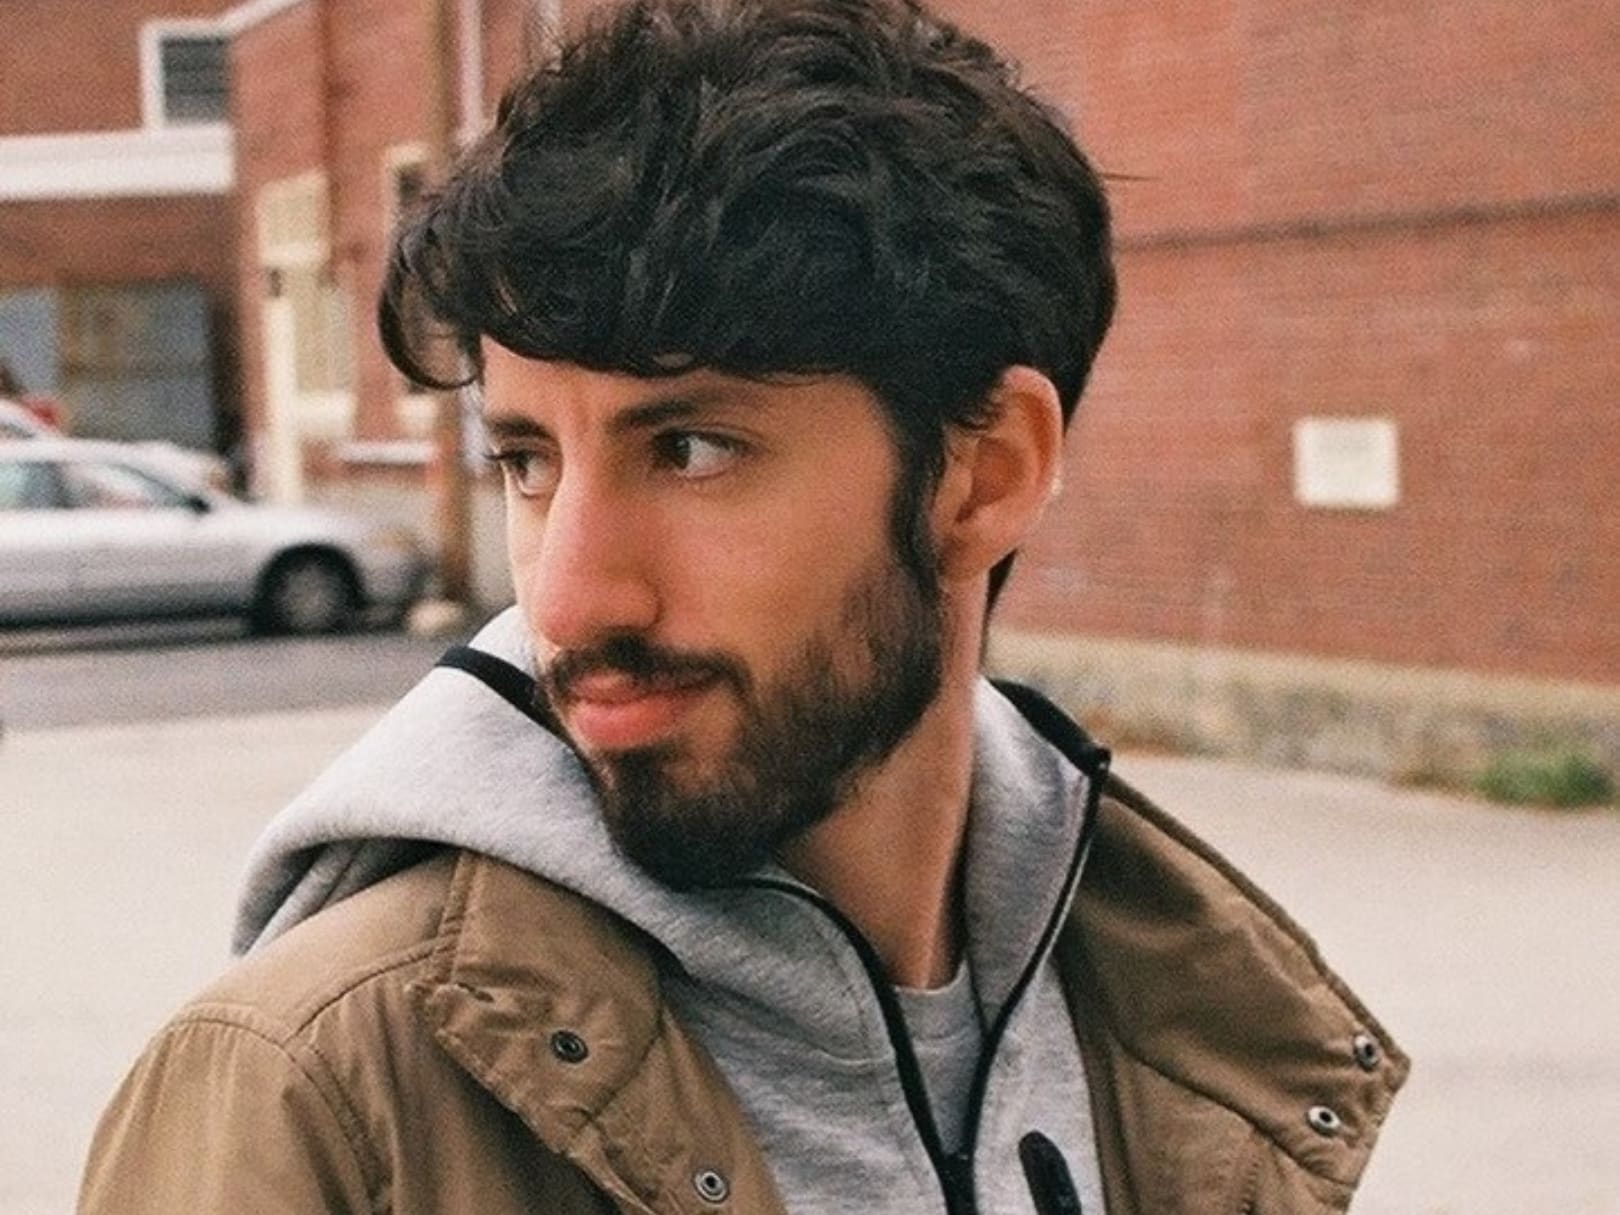 Image of male with dark hair, beard, mustache standing outside in grey hoodie and tan jacket